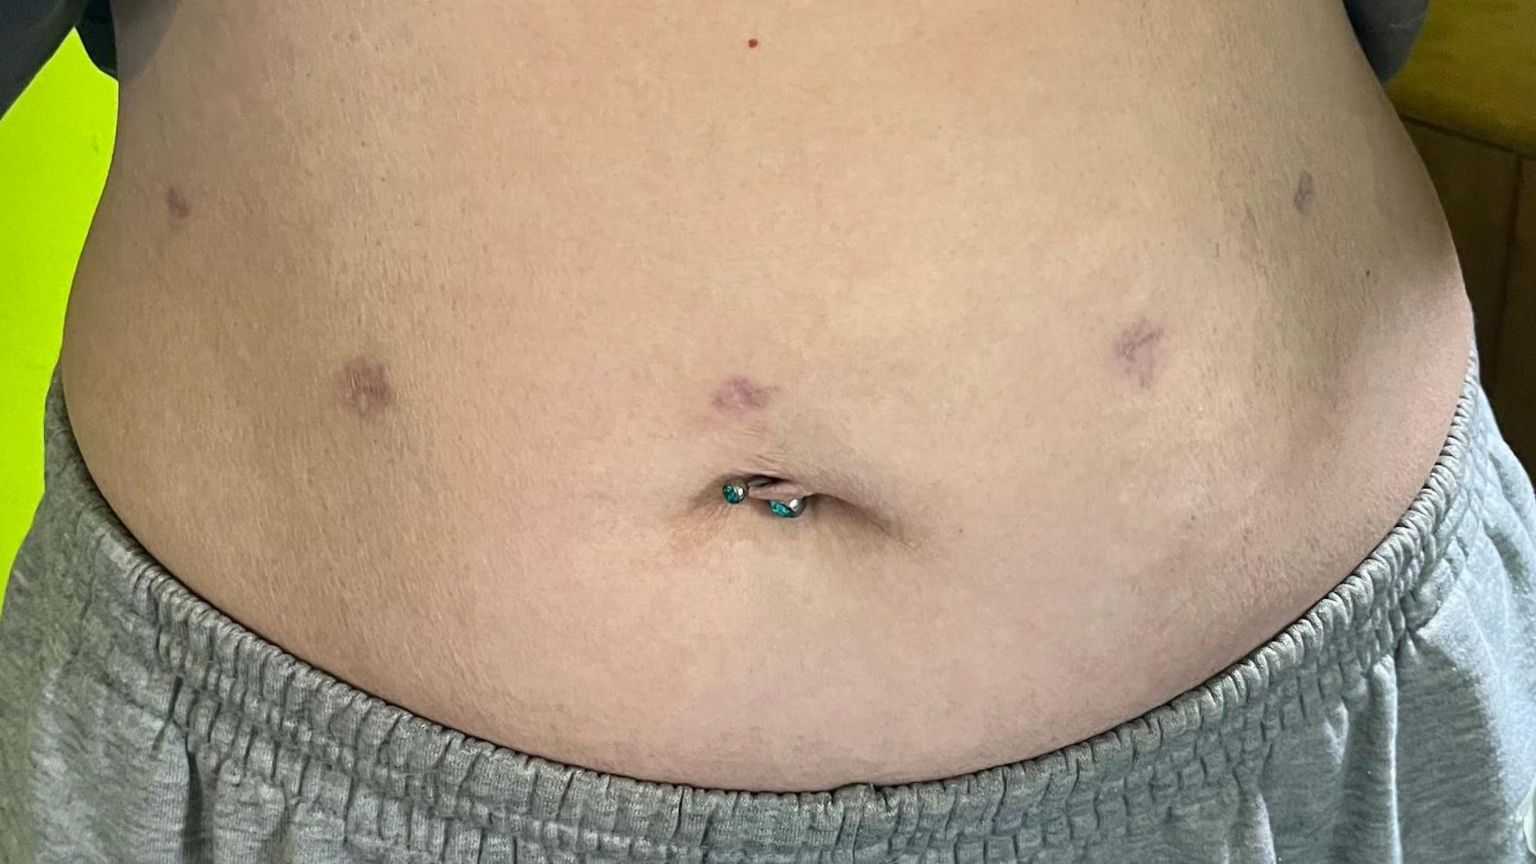 Stomach of patient showing five keyhole scars